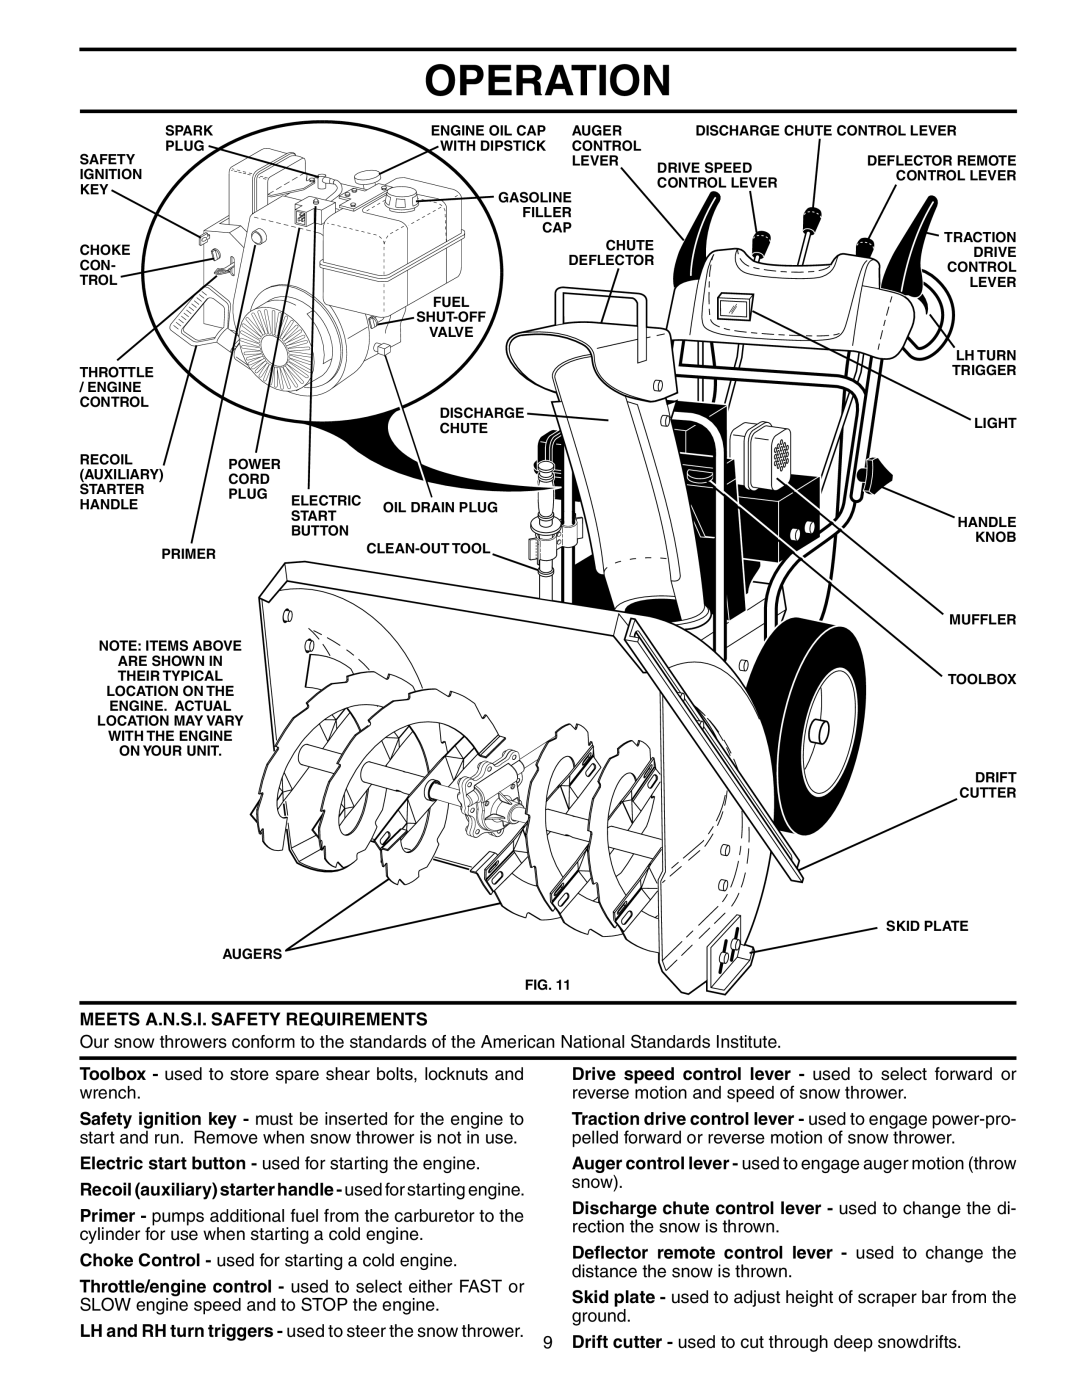 Husqvarna 1130STE XP owner manual Operation, Meets A.N.S.I. Safety Requirements 